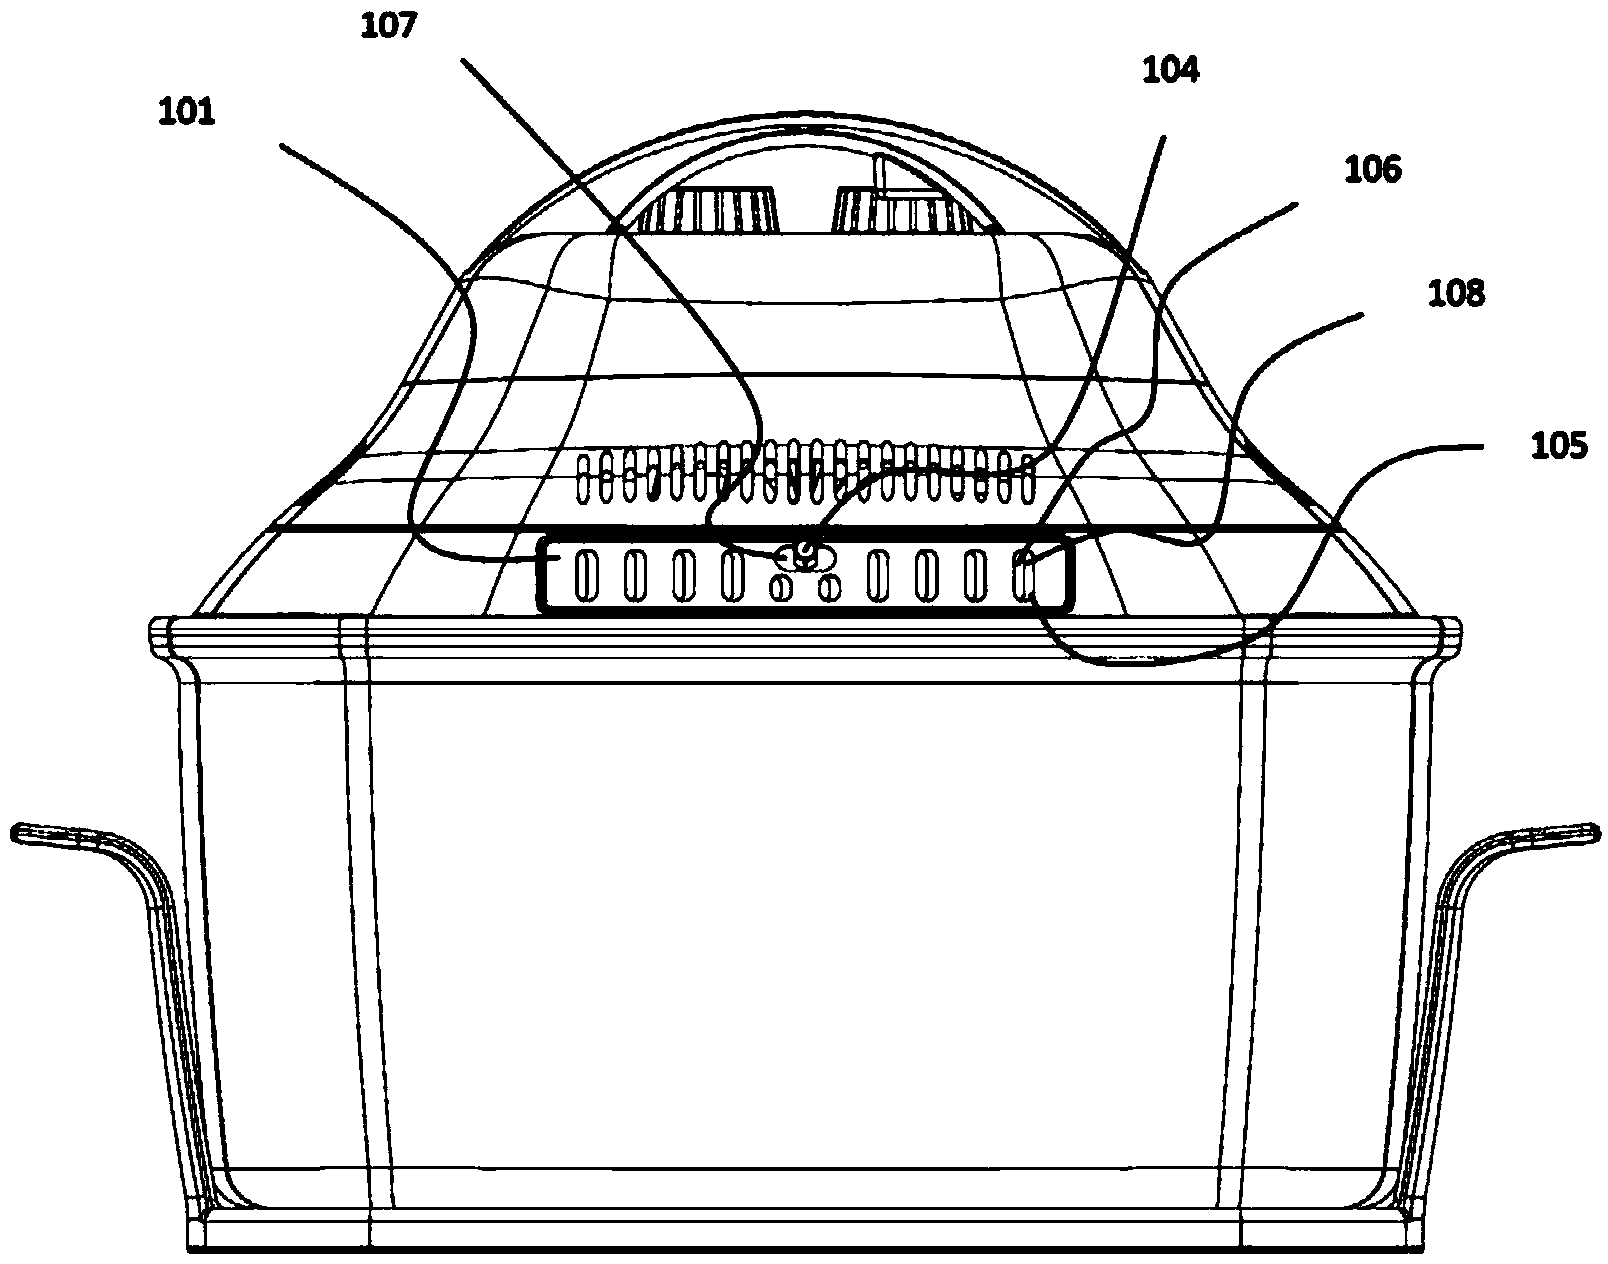 Adjustable exhaust device for light wave oven